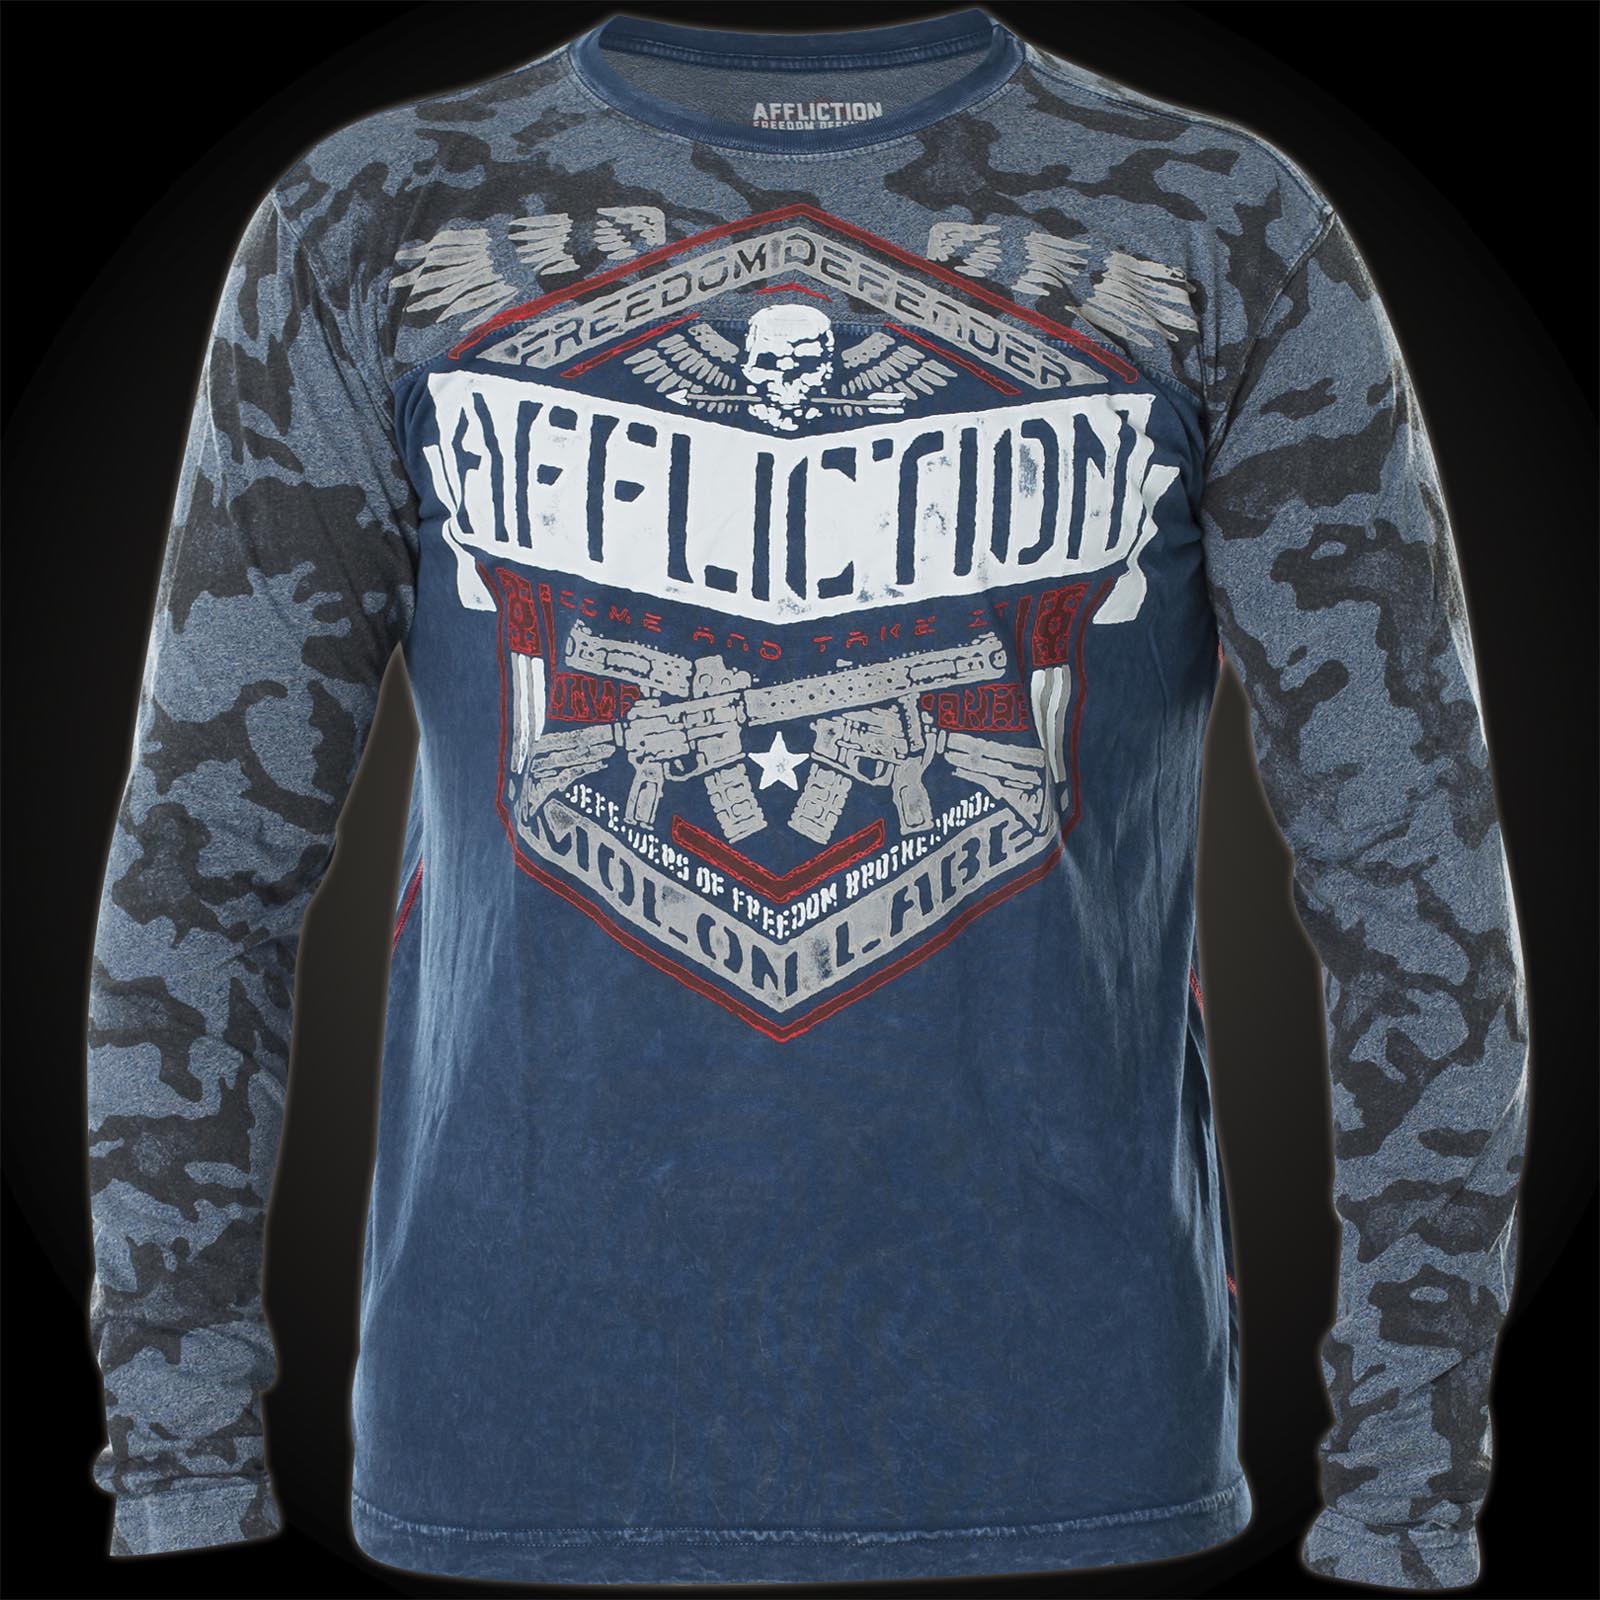 Affliction Deployed sweater with weapons and lettering